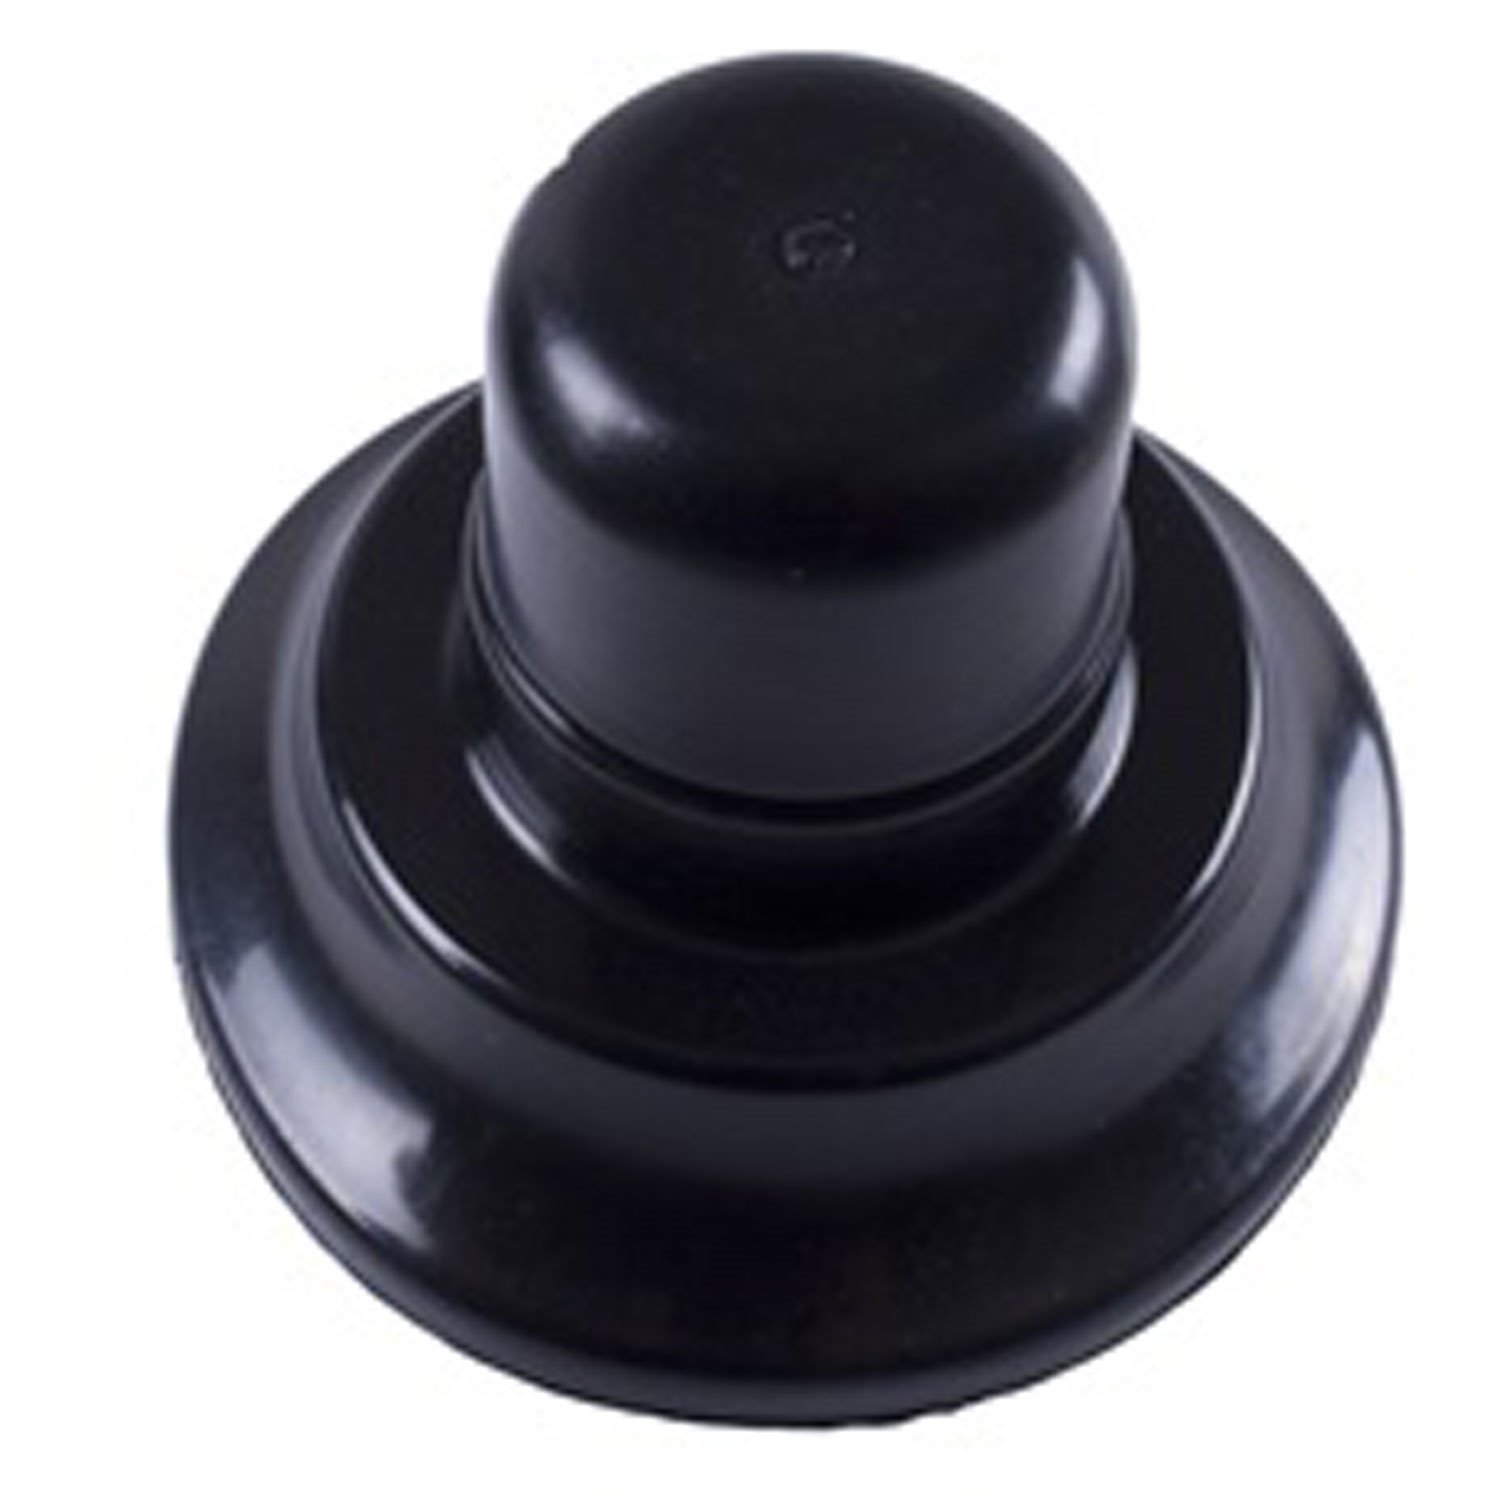 This plastic axle hub dust cap from Omix-ADA fits the AMC 20 rear axle found in 76-86 Jeep CJ models.